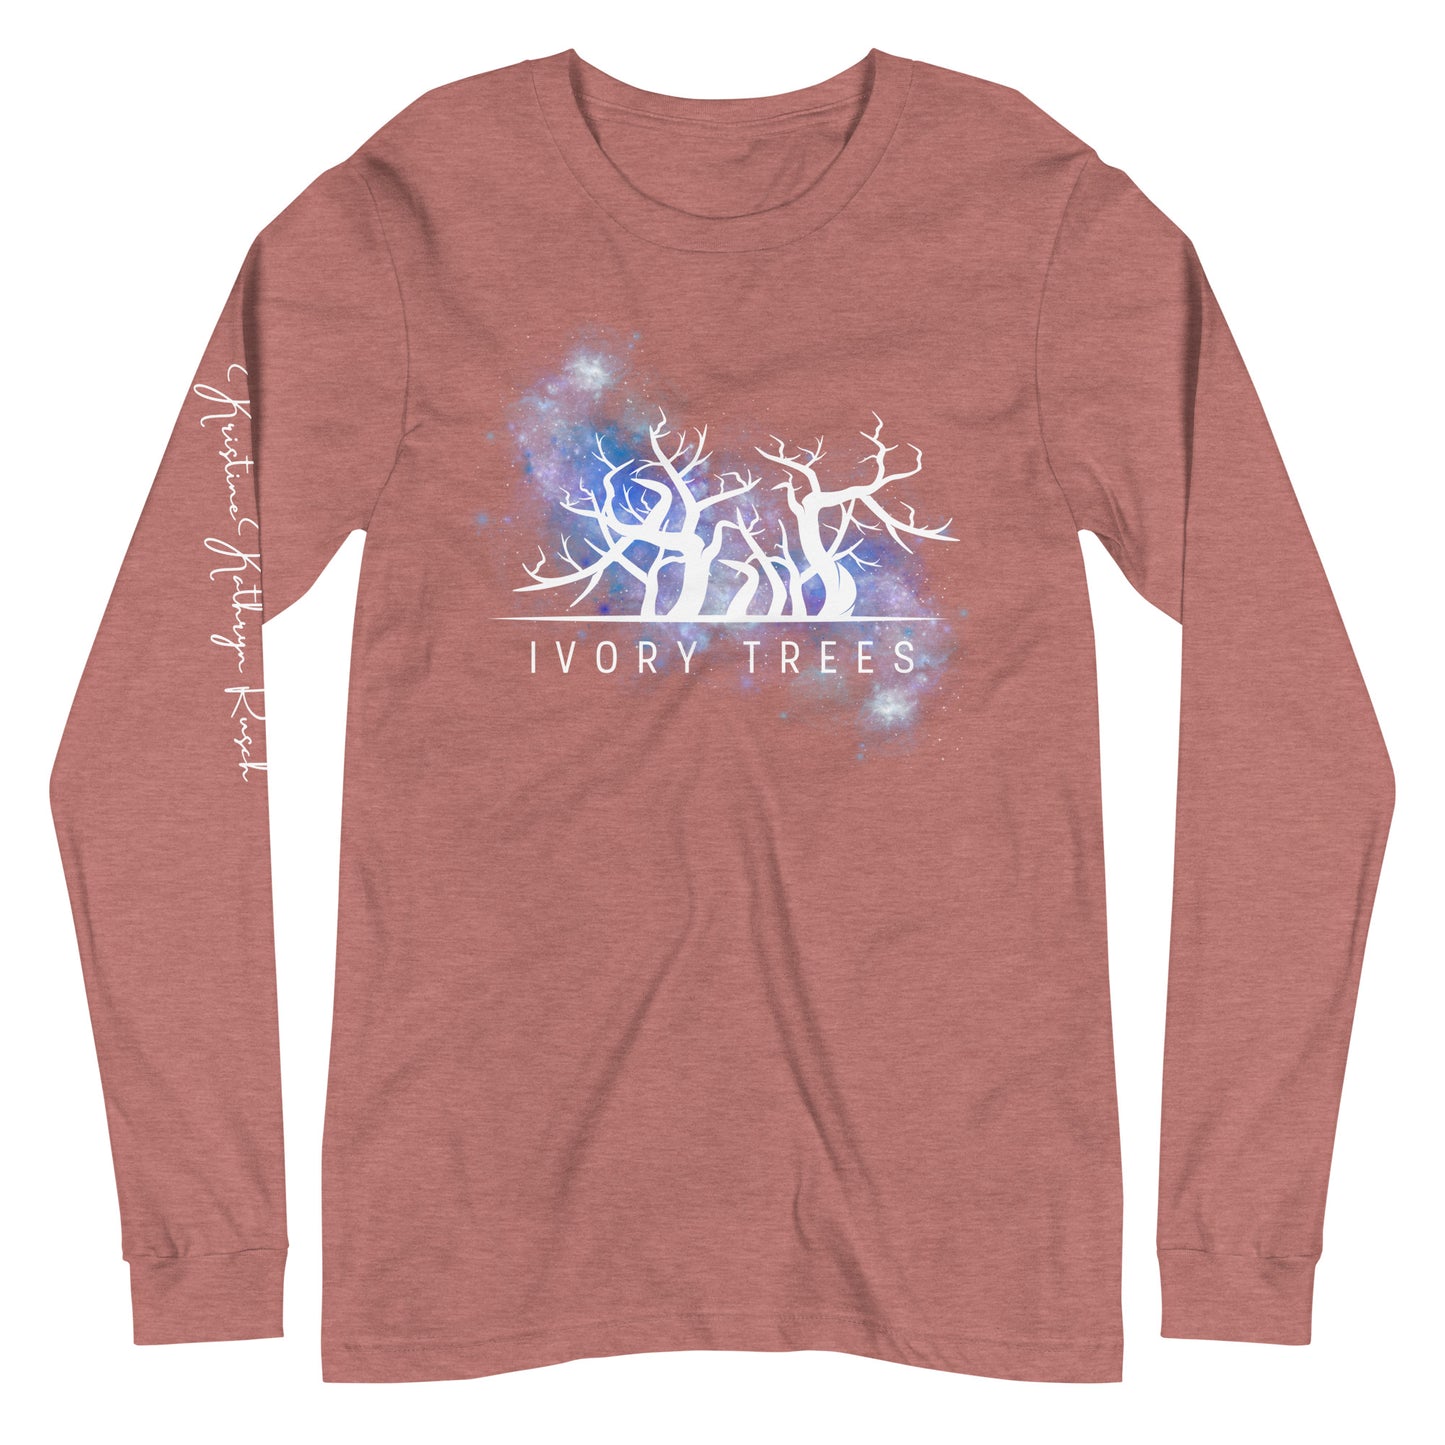 IVORY TREES NEBULA L/S Tee - The Diving Universe by Kristine Kathryn Rusch